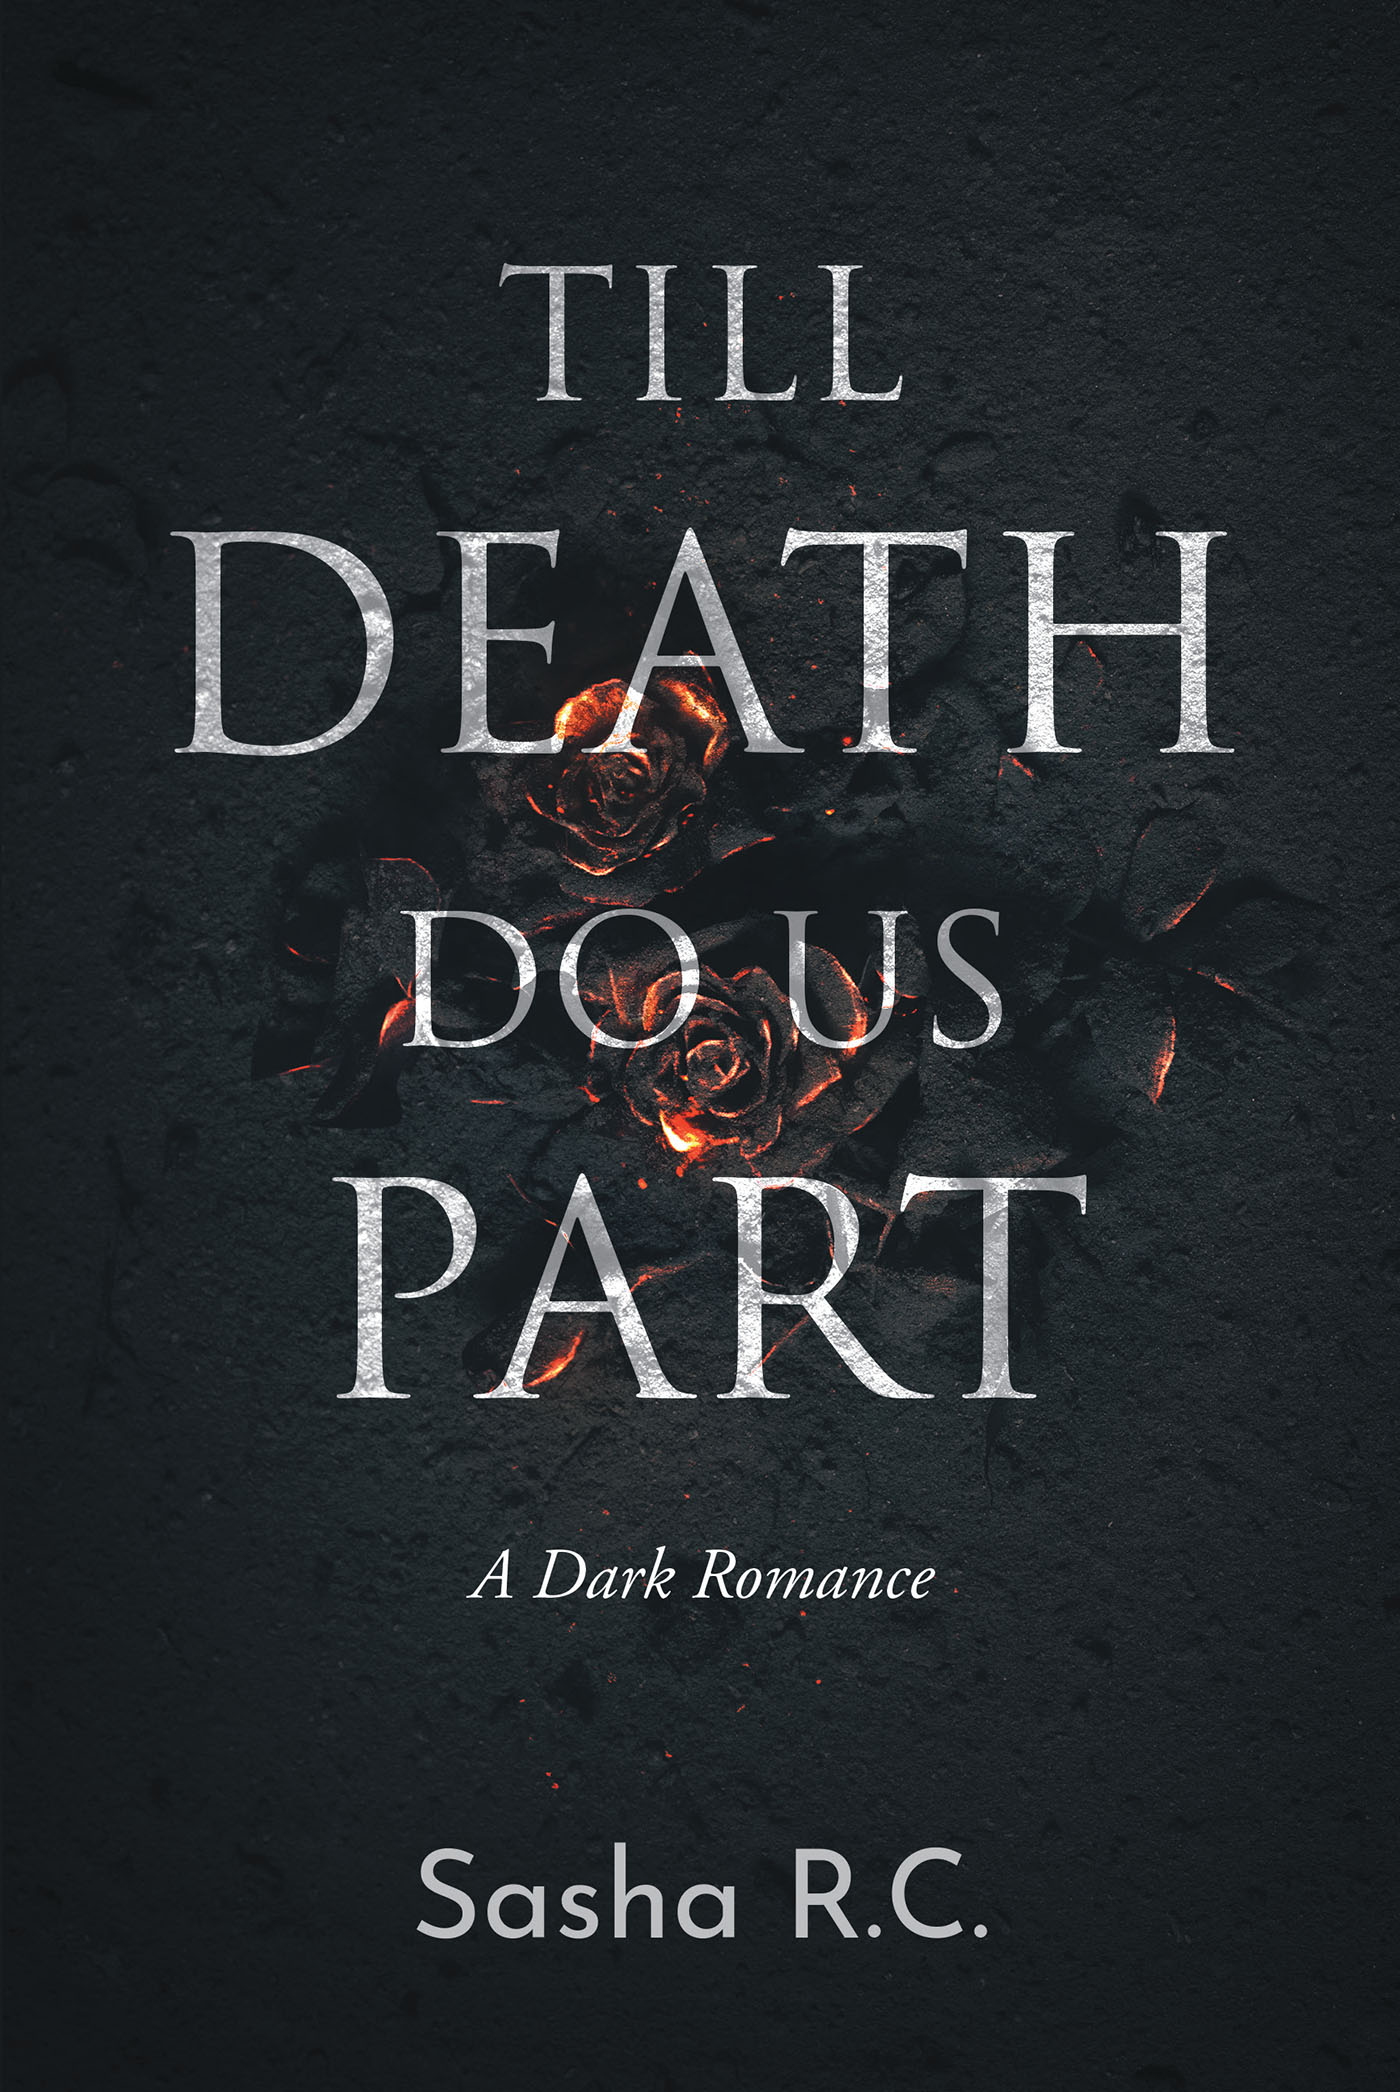 Author Sasha R.C.’s New Book, “Till Death Do Us Part,” is a Dark Romance That Centers Around a Woman Trapped in an Abusive Marriage & the One Man Who Longs to Save Her